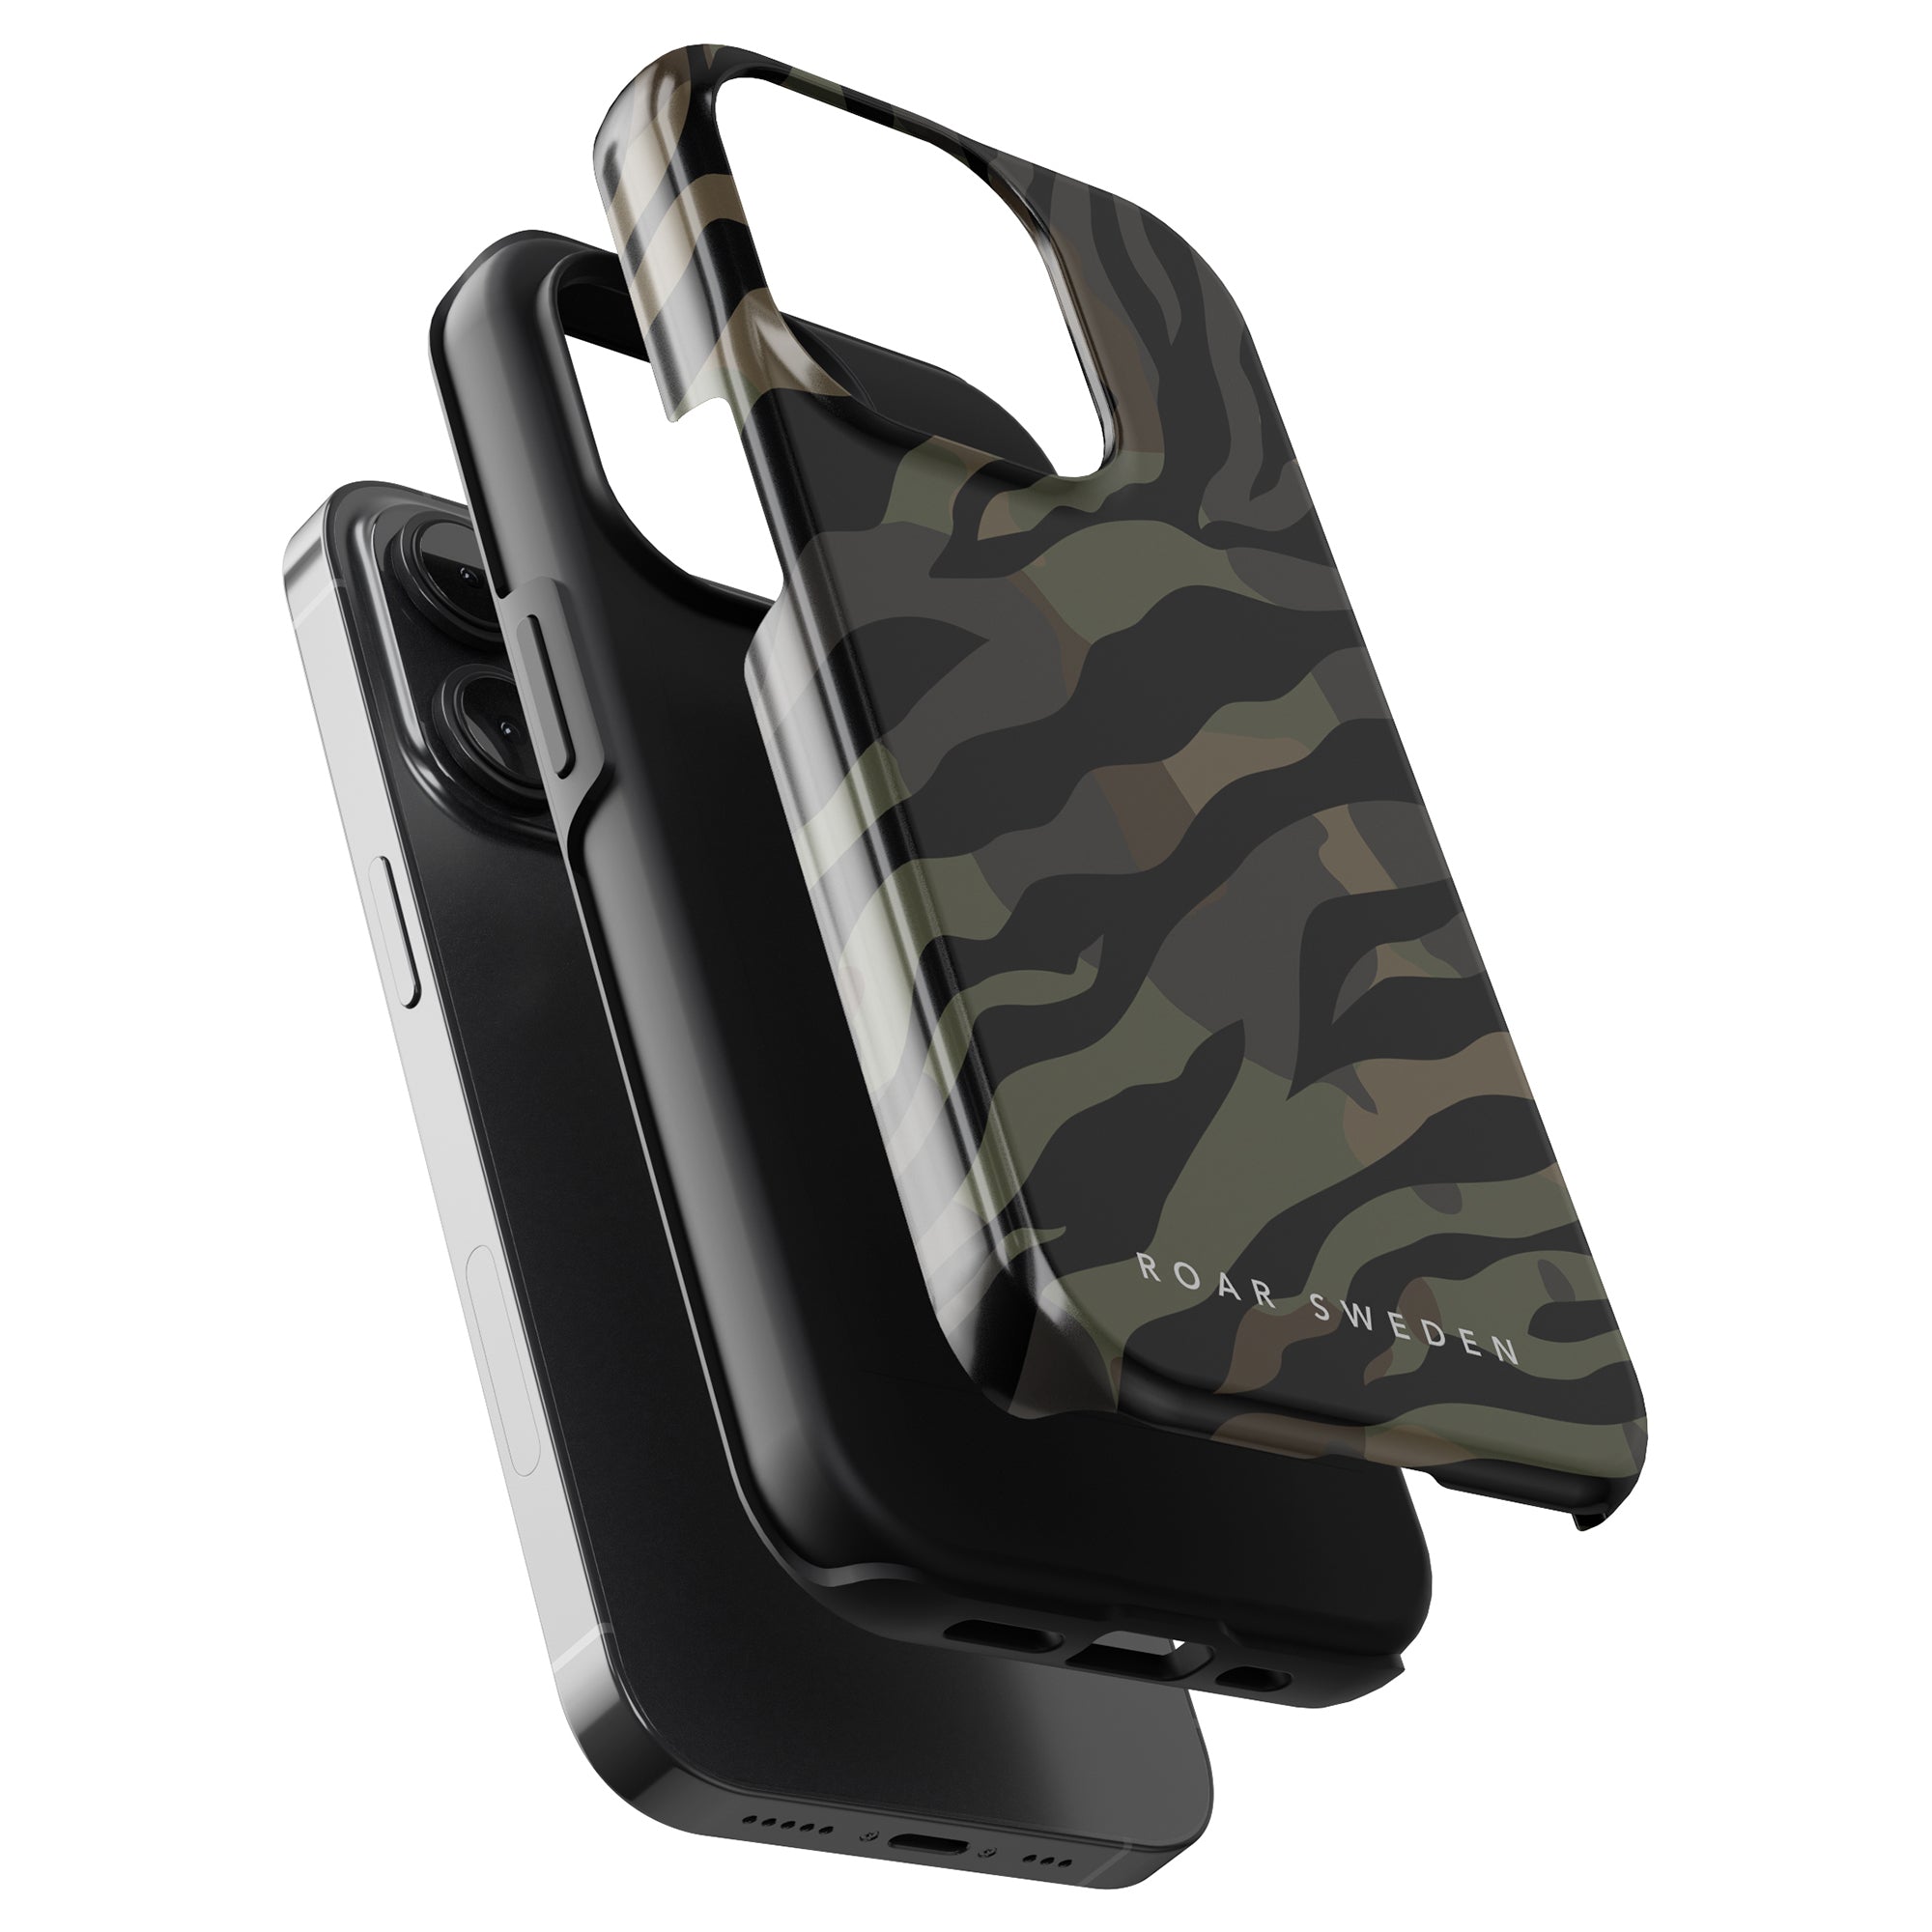 The Army - Tough Case features a stylish camouflage pattern.